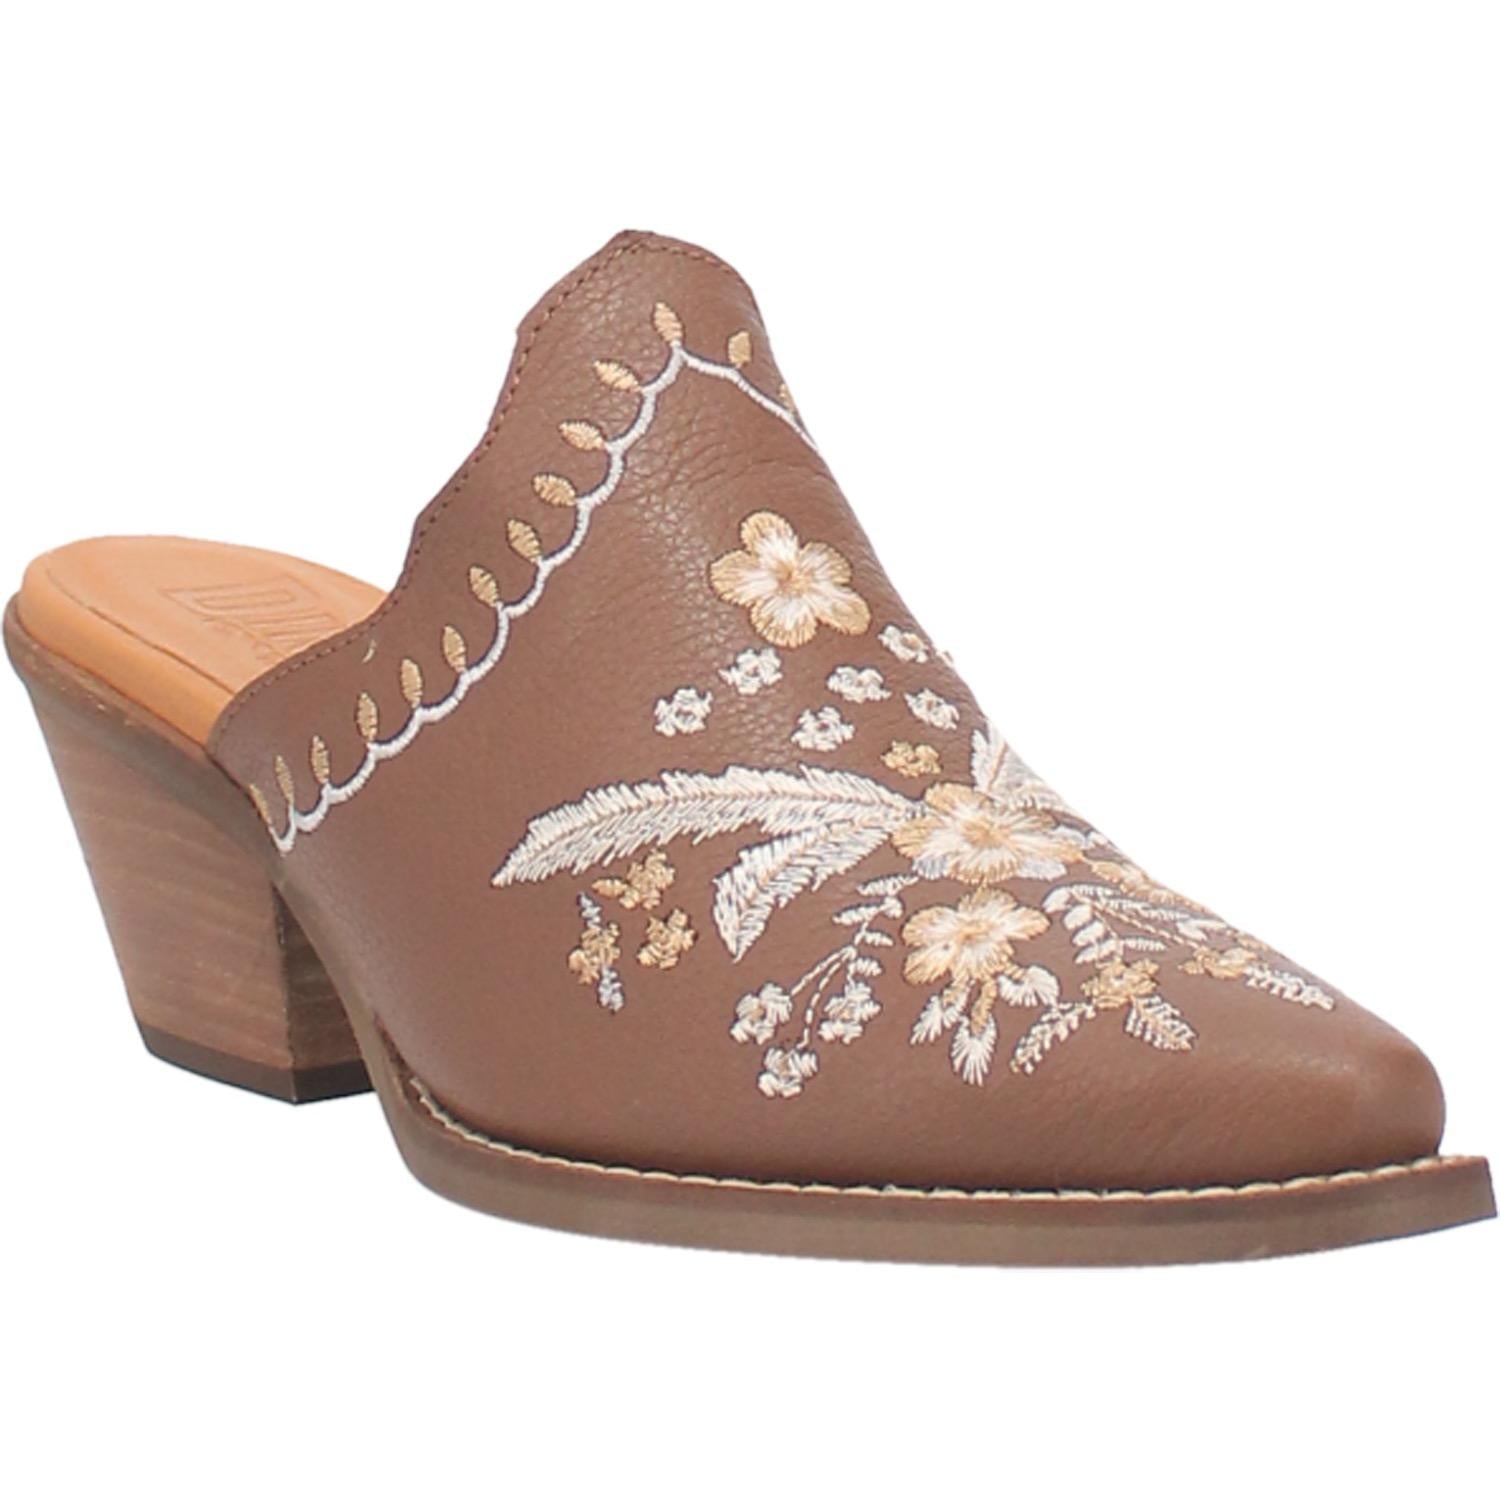 A brown bootie with a white and cream floral and feather design on the upper, a white and cream stitched design on the edge, and a short heel